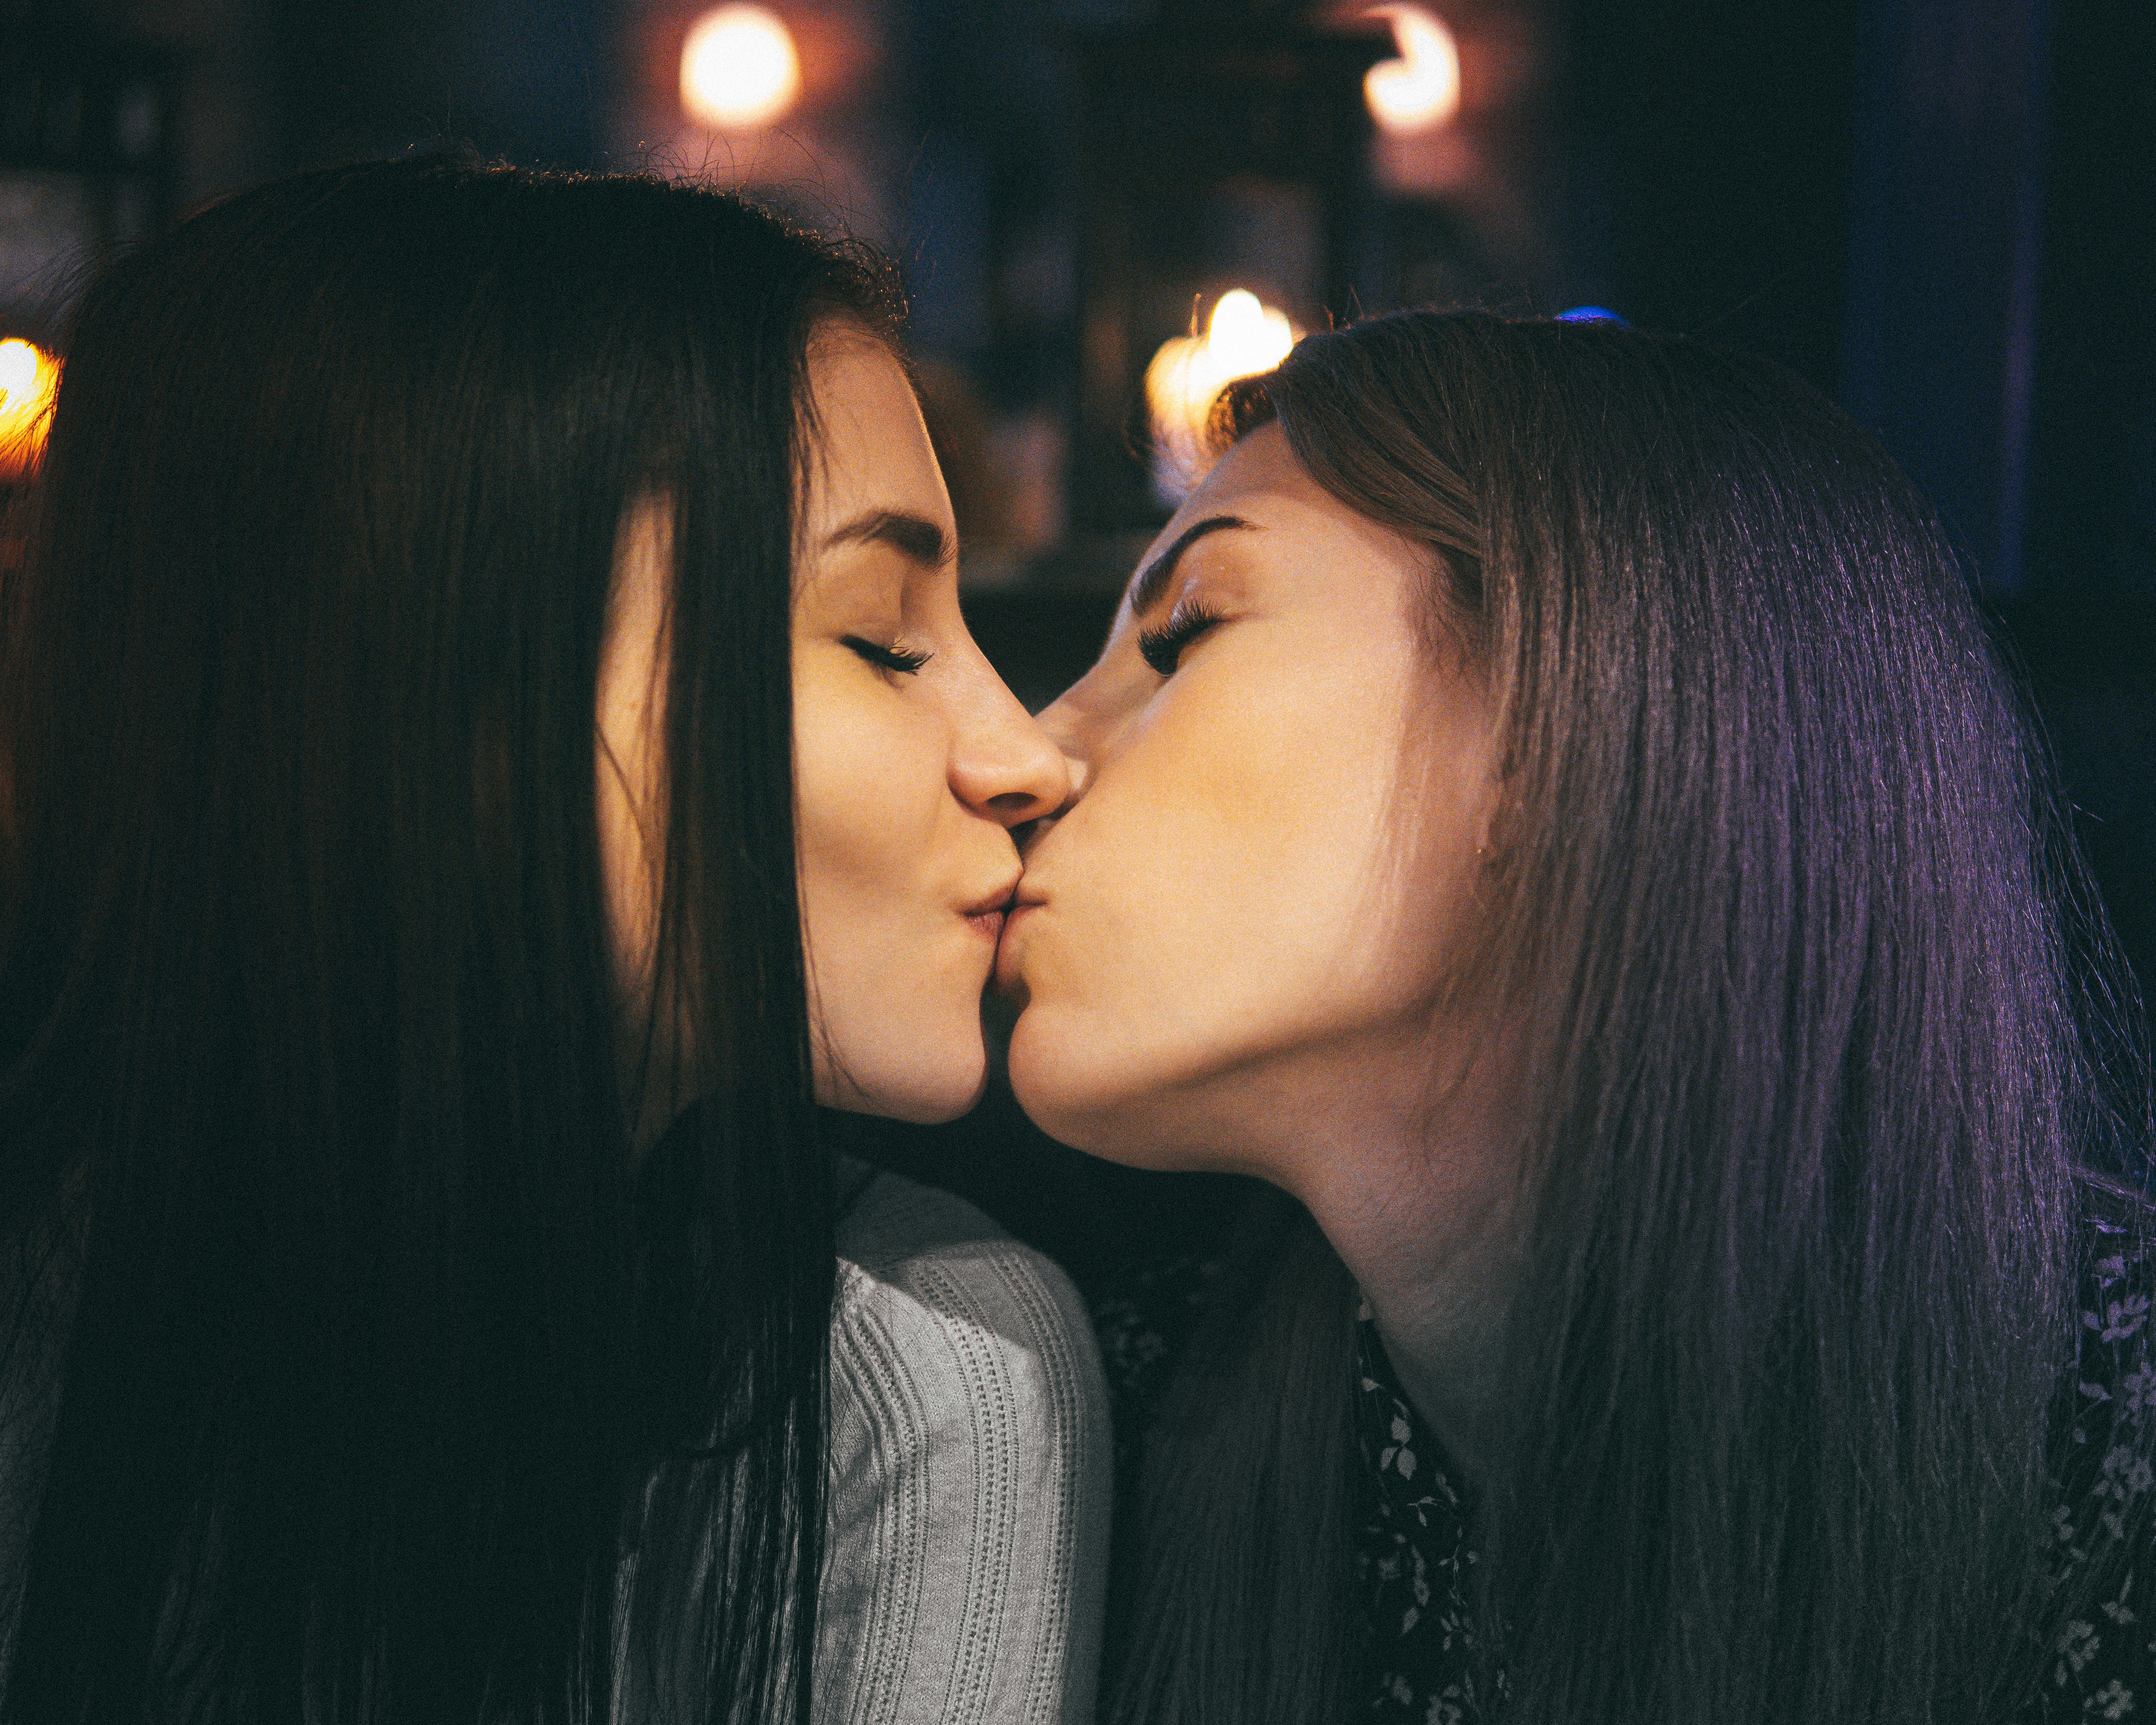 750+ Lesbian Kiss Pictures Download Free Images on Unsplash